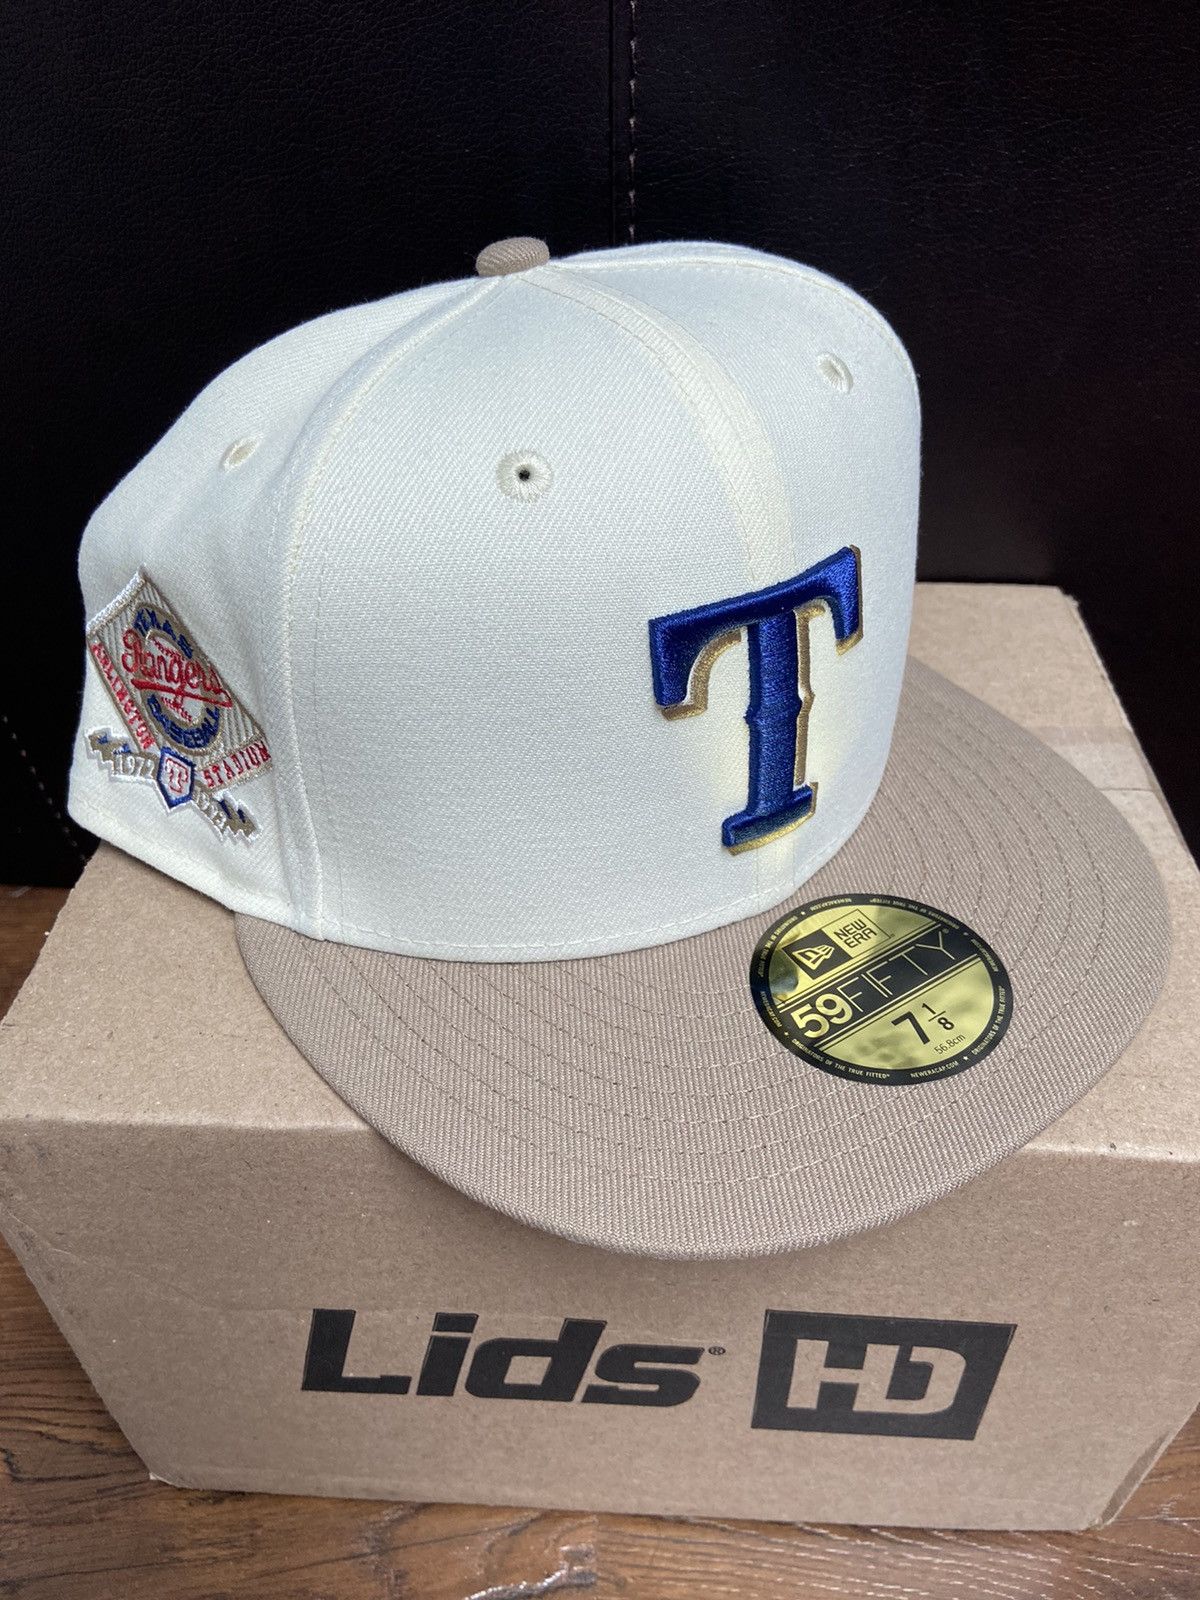 New Era x Lids 59Fifty Texas Rangers “Strictly Business” Fitted Hat 7 1/8.